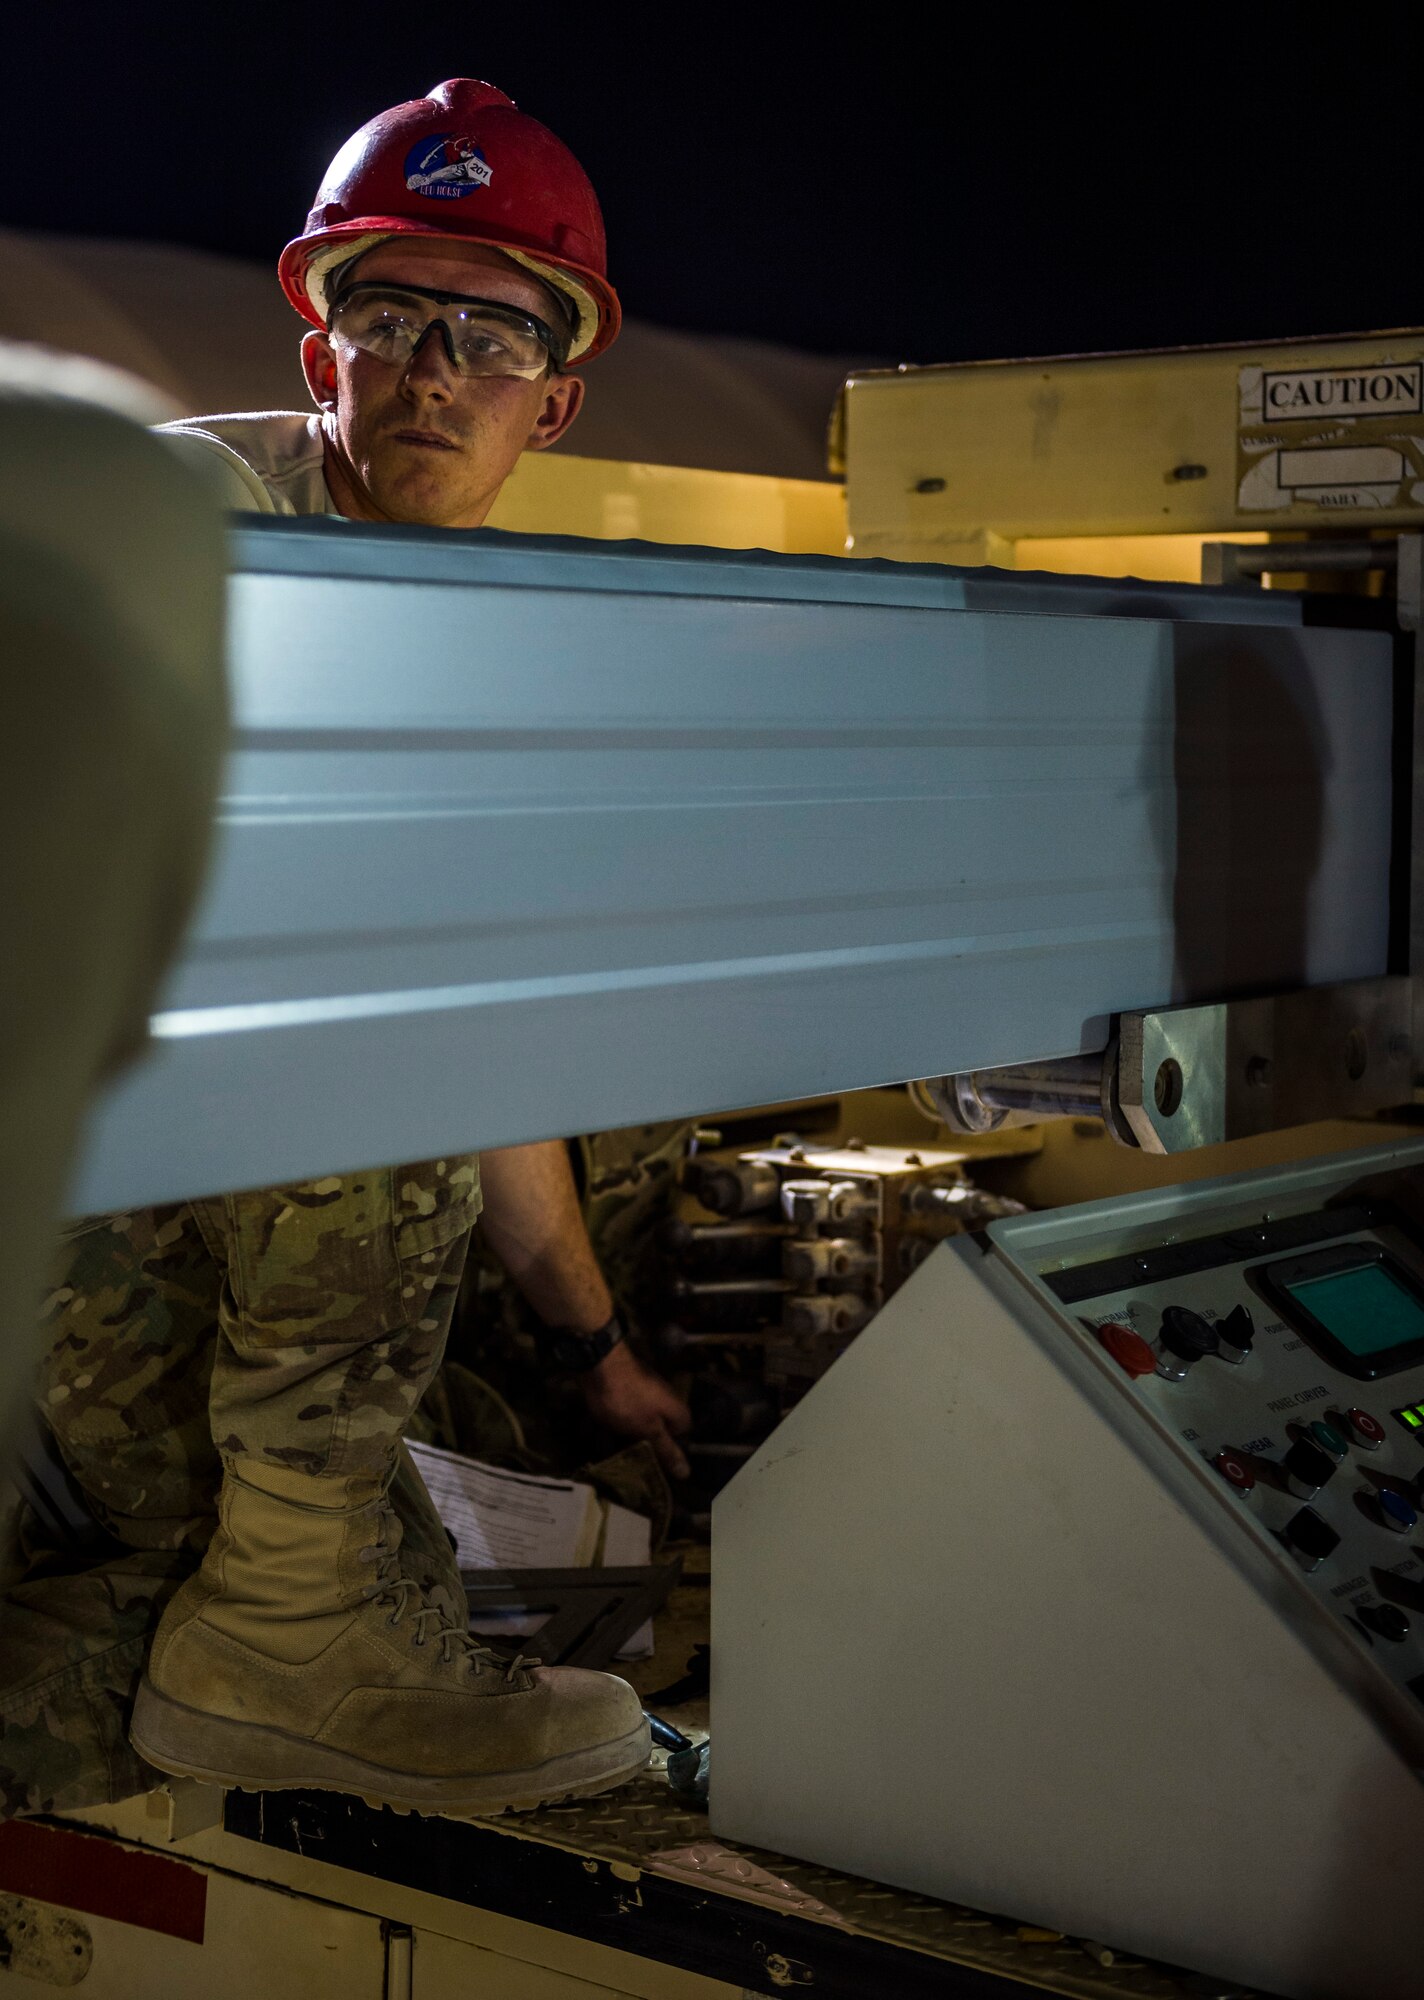 Staff Sgt. James Derbyshire, 557th Expeditionary RED HORSE Squadron structures craftsman, runs an Ultimate Building Machine to shape steel arches for a K-Span building Aug. 3, 2014 at an undisclosed location in Southwest Asia. Airmen from the 557th ERHS came from Al Udeid to build two K-Span buildings to establish more permanent structures than the current tents used as passenger terminals. The unit is comprised of all Air National Guard members deployed from Penn. in support of Operation Enduring Freedom. (U.S. Air Force photo by Staff Sgt. Jeremy Bowcock)